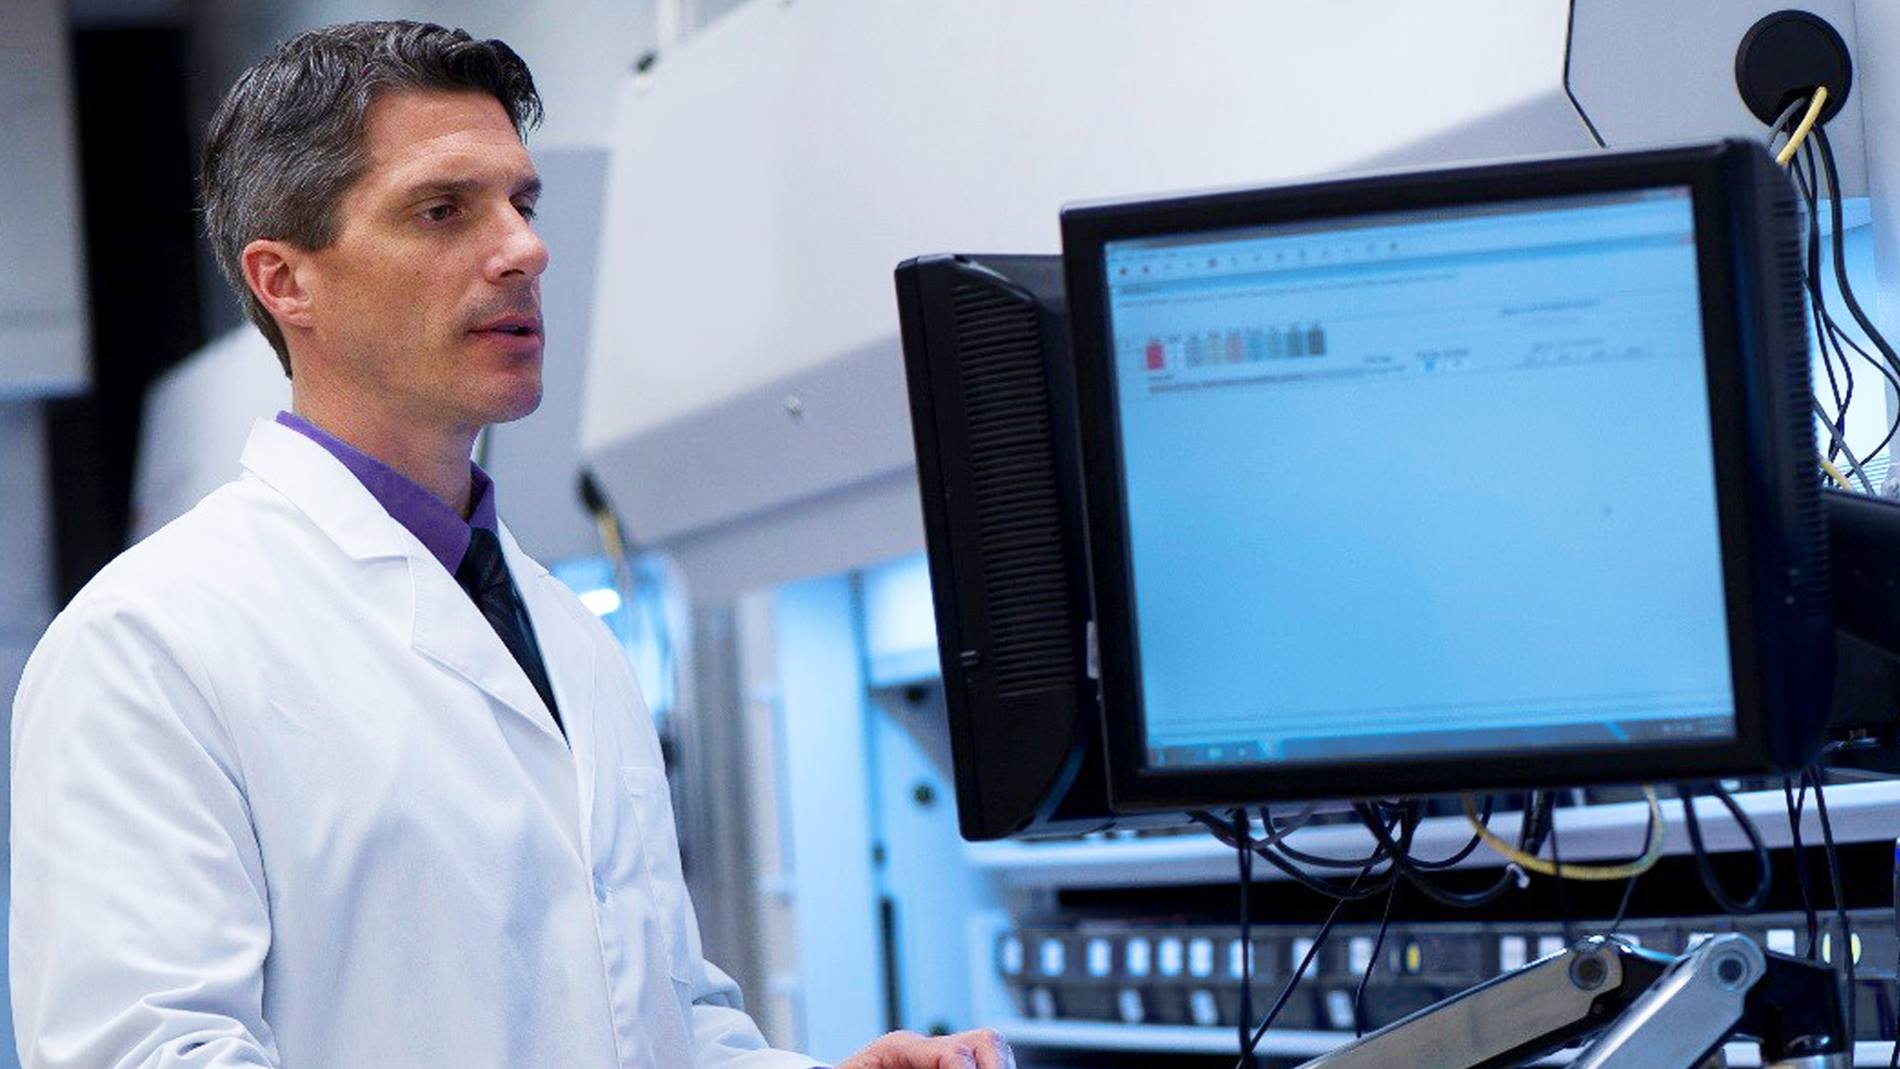 A pharmacist uses AutoPharm Enterprise, an enterprise-wide software that manages medication inventory.